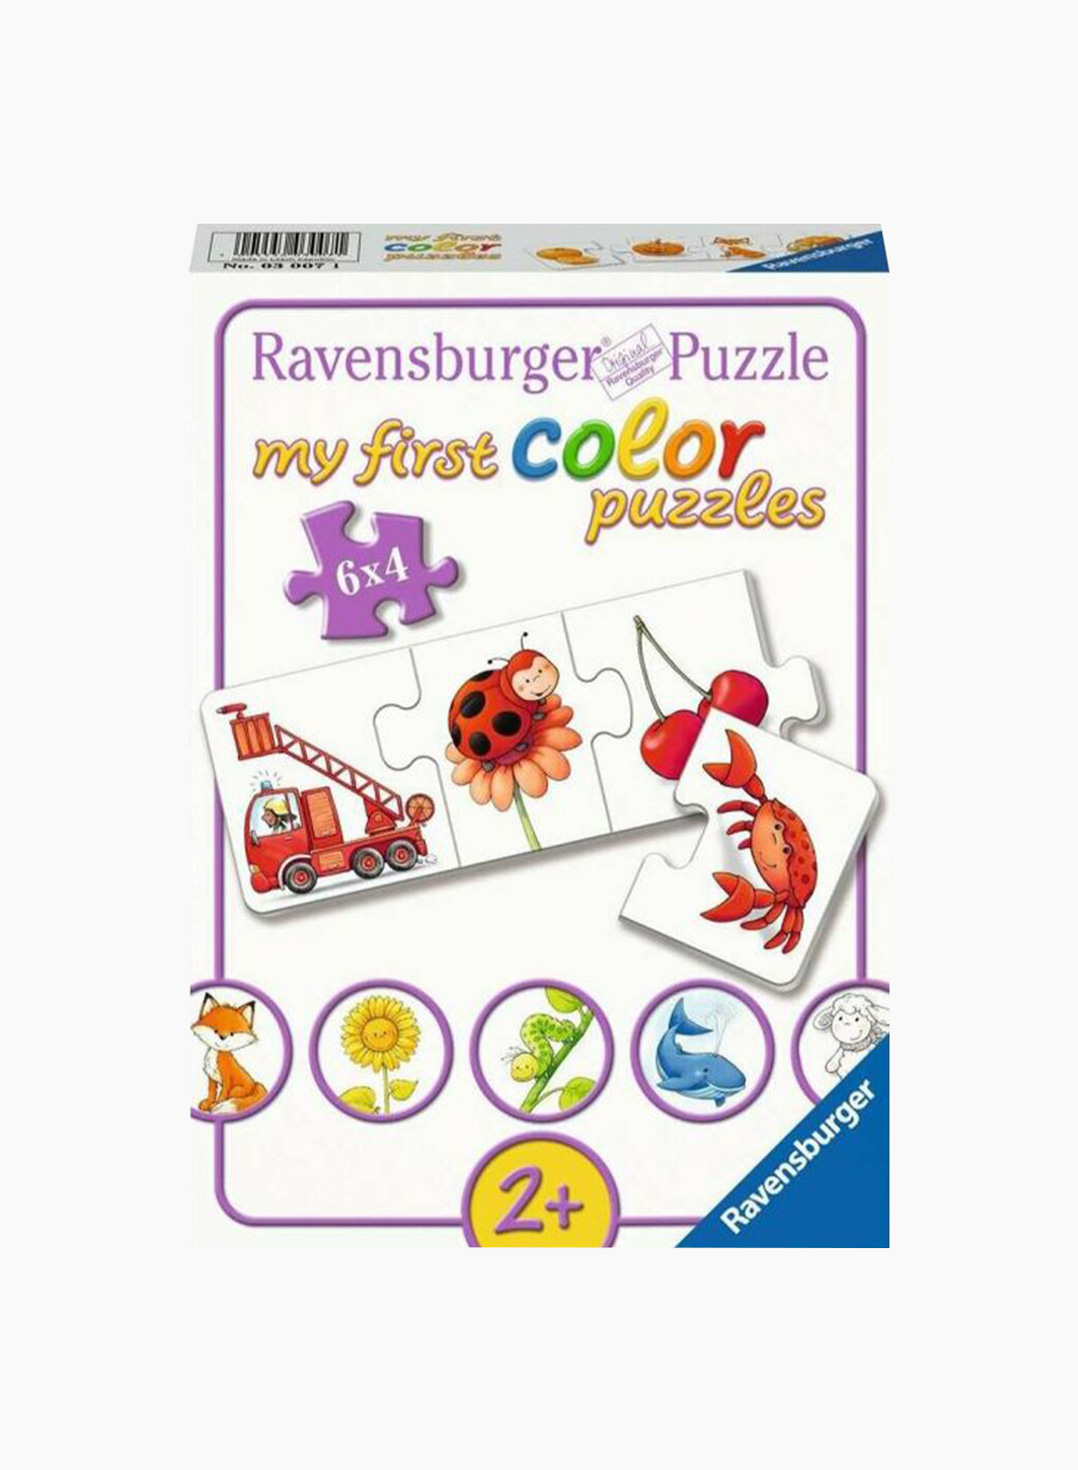 Ravensburger Puzzle All of my Colors 6x4p